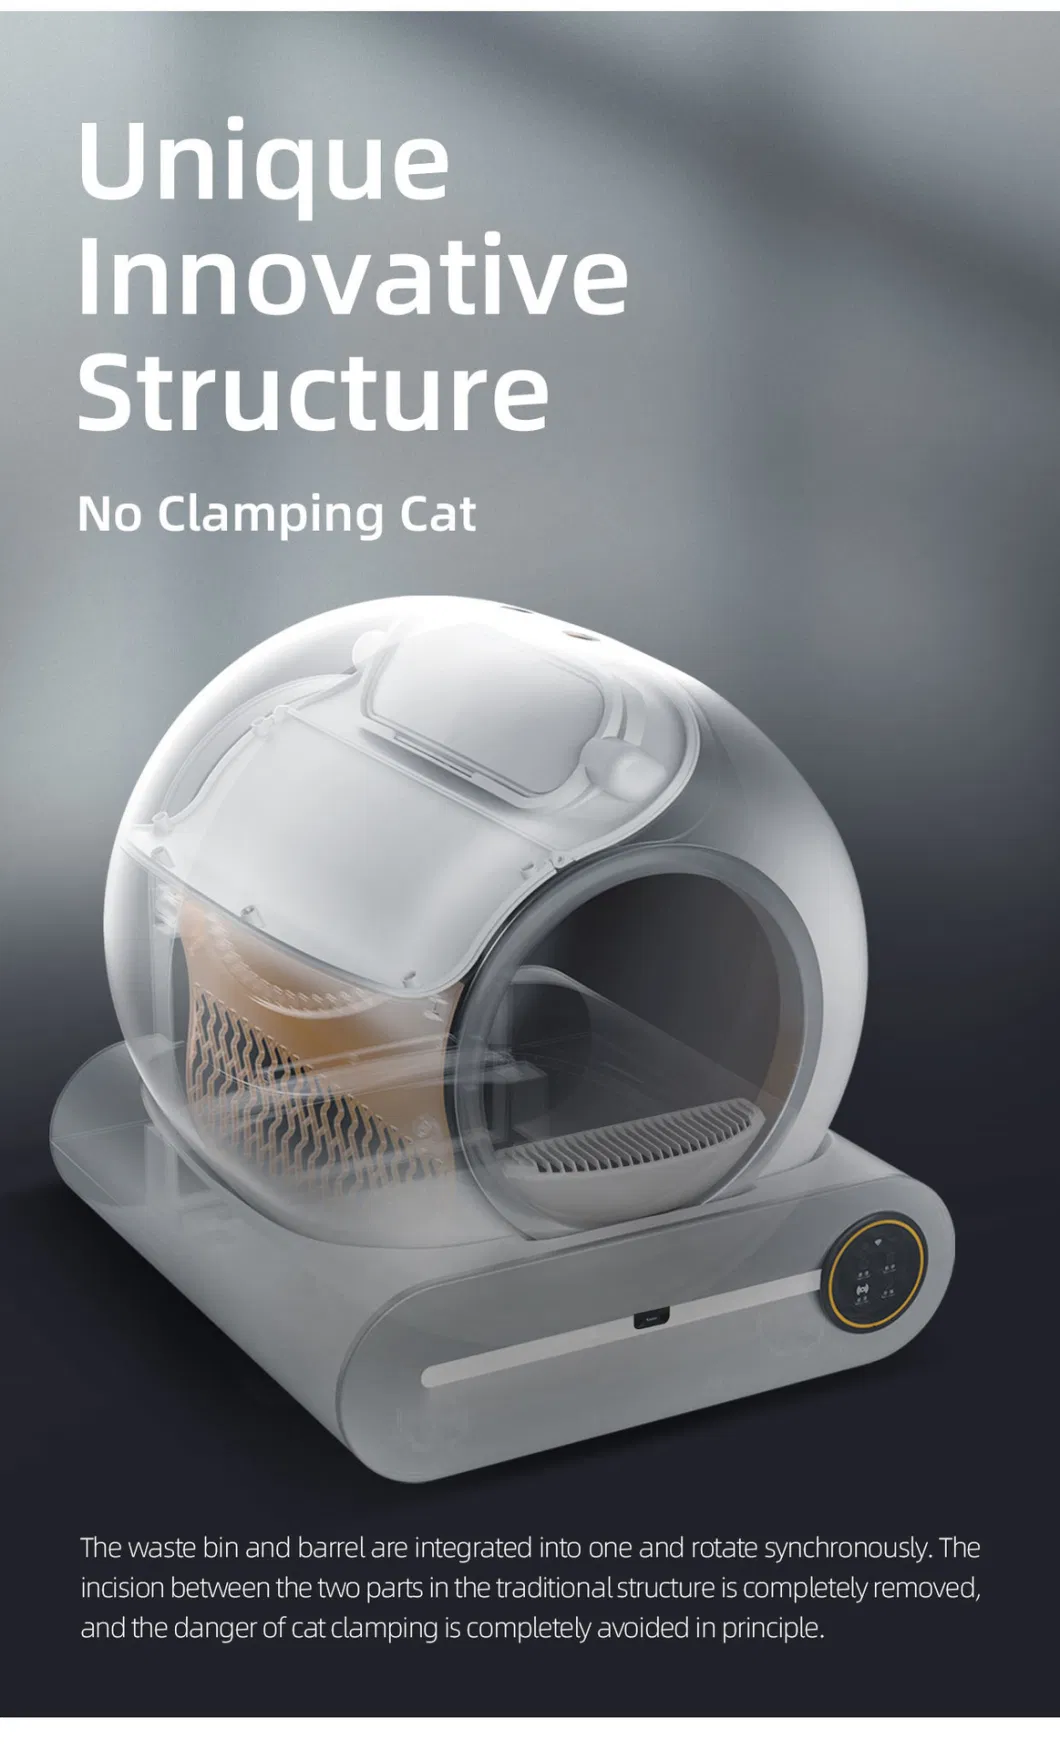 Large Capacity Self Cleaning Cat Litter Box Smart Automatic Cat Litter Box with APP Control for Multiple Cats